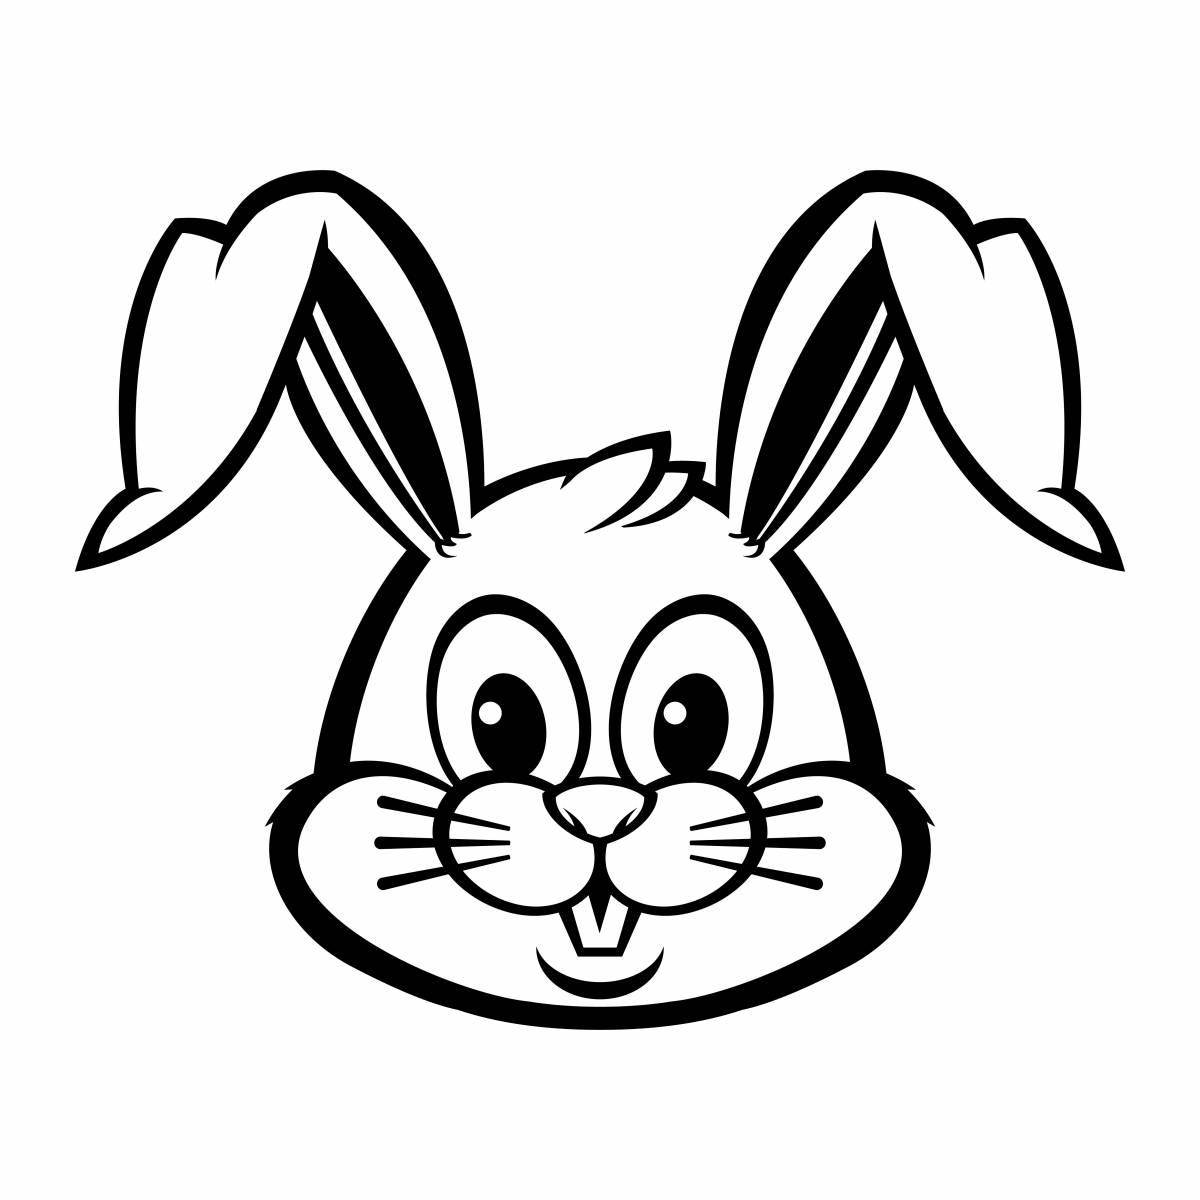 Colorful hare face coloring book